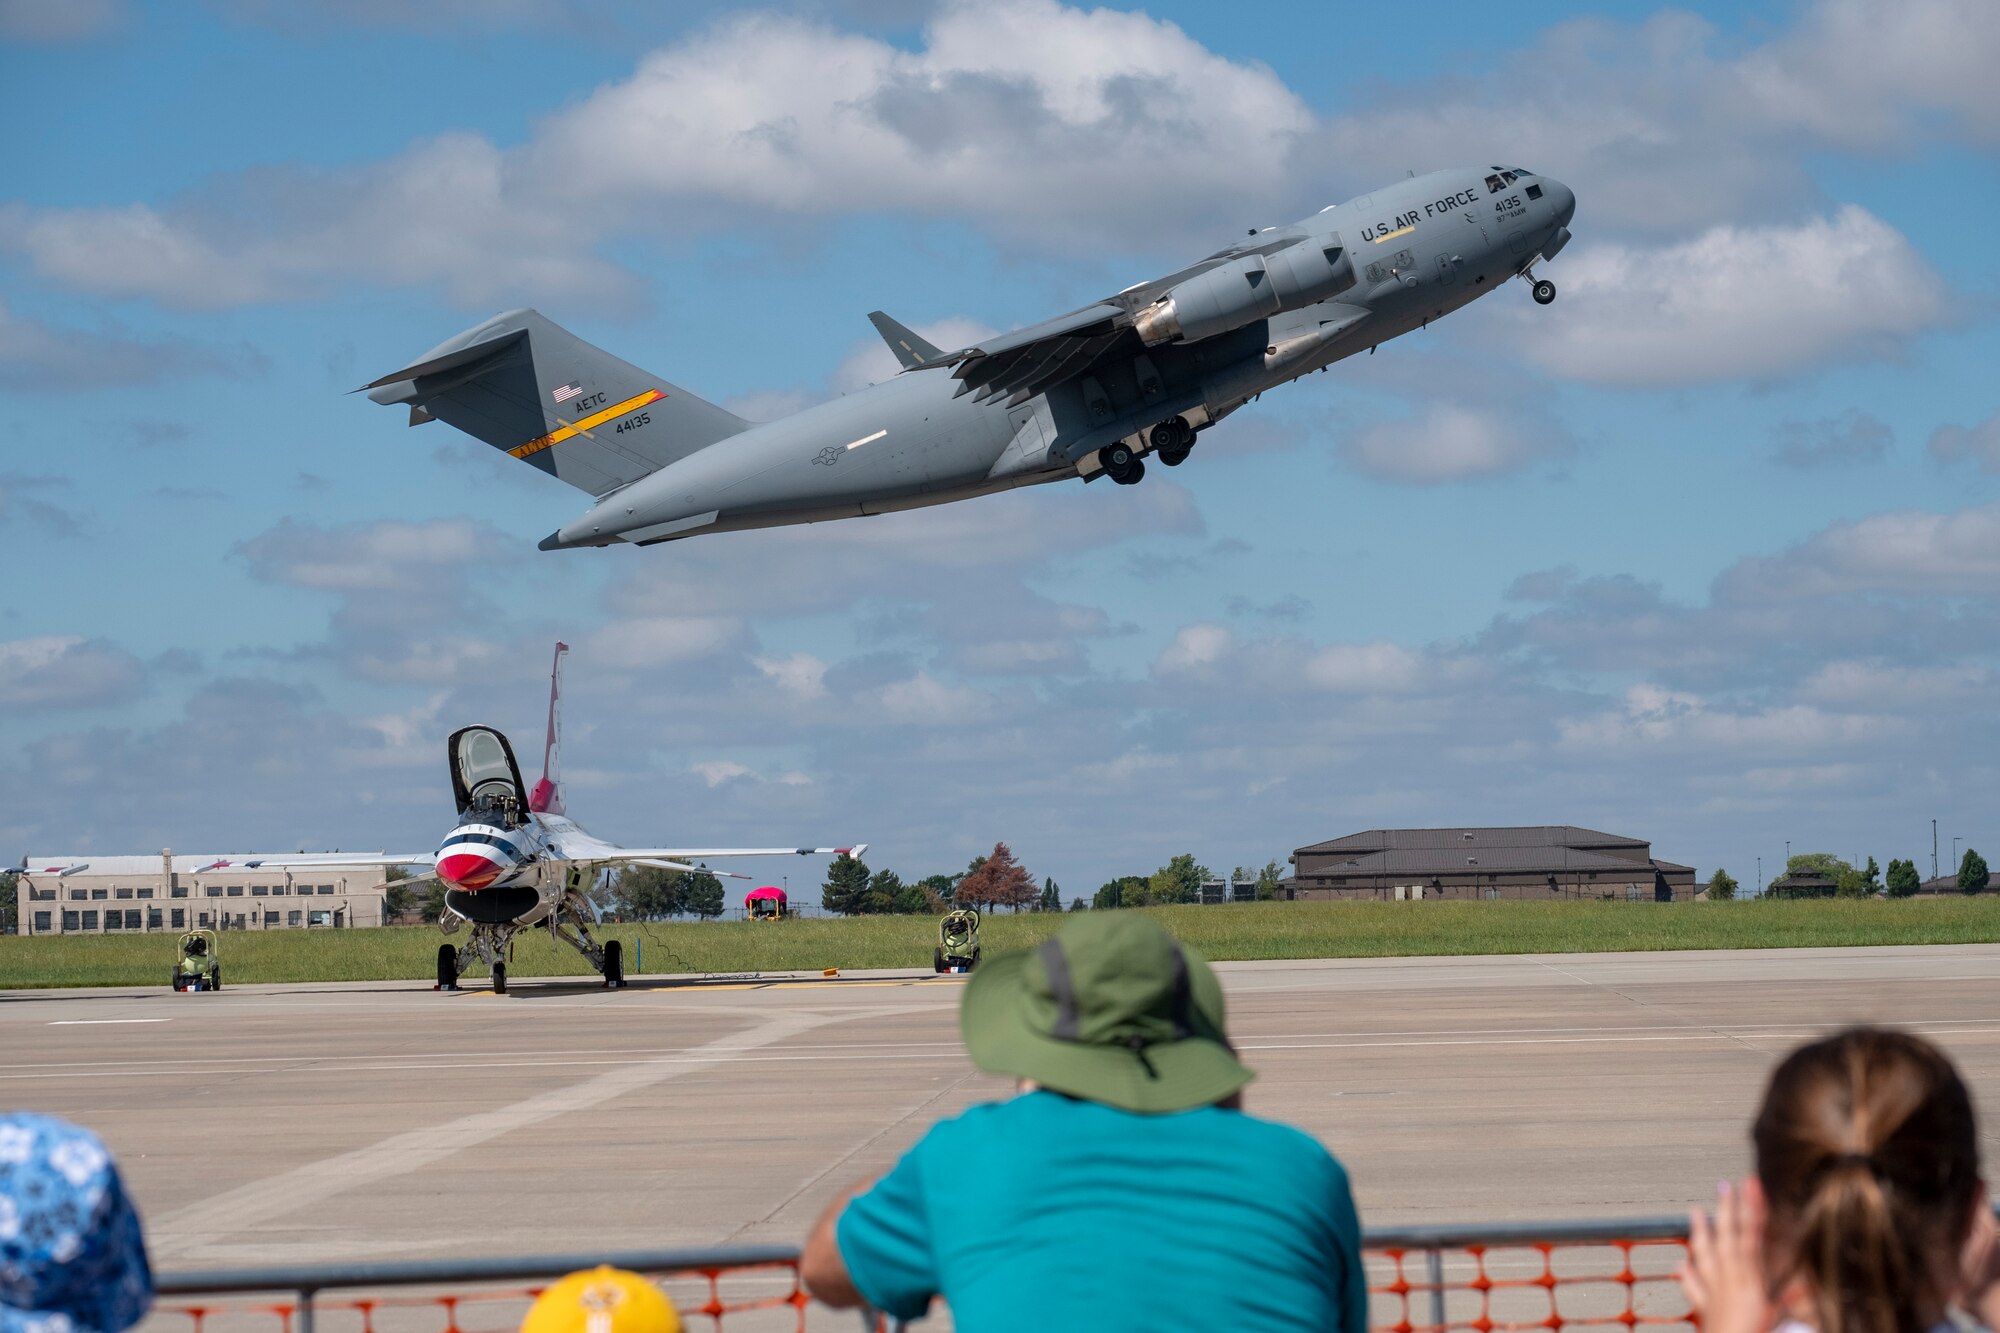 A Team McConnell KC-135 Stratotanker demonstrates its aerial refueling capabilities to spectators at the Frontiers in Flight Open House and Airshow Sept. 9, 2018, McConnell AFB, Kan.  The KC-135 was initially tasked with refueling strategic bombers, but was used extensively in the Vietnam War and later conflicts such as Operation Desert Storm to extend the range and endurance of U.S. tactical fighters and bombers.  (U.S. Air Force photo by Staff Sgt. Preston Webb)